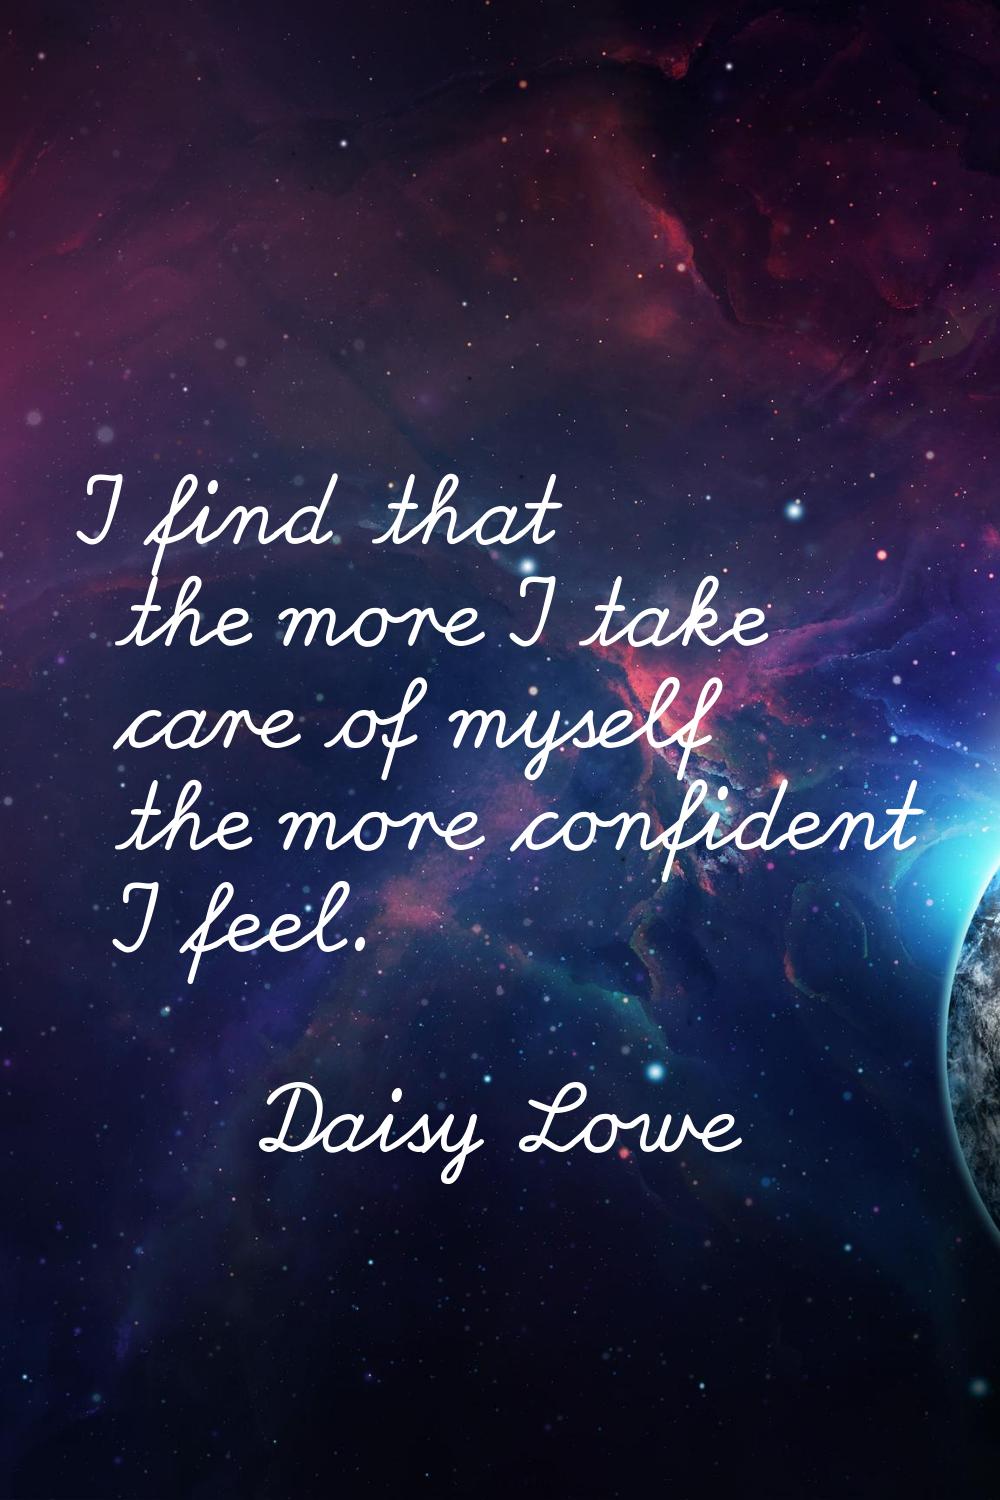 I find that the more I take care of myself the more confident I feel.